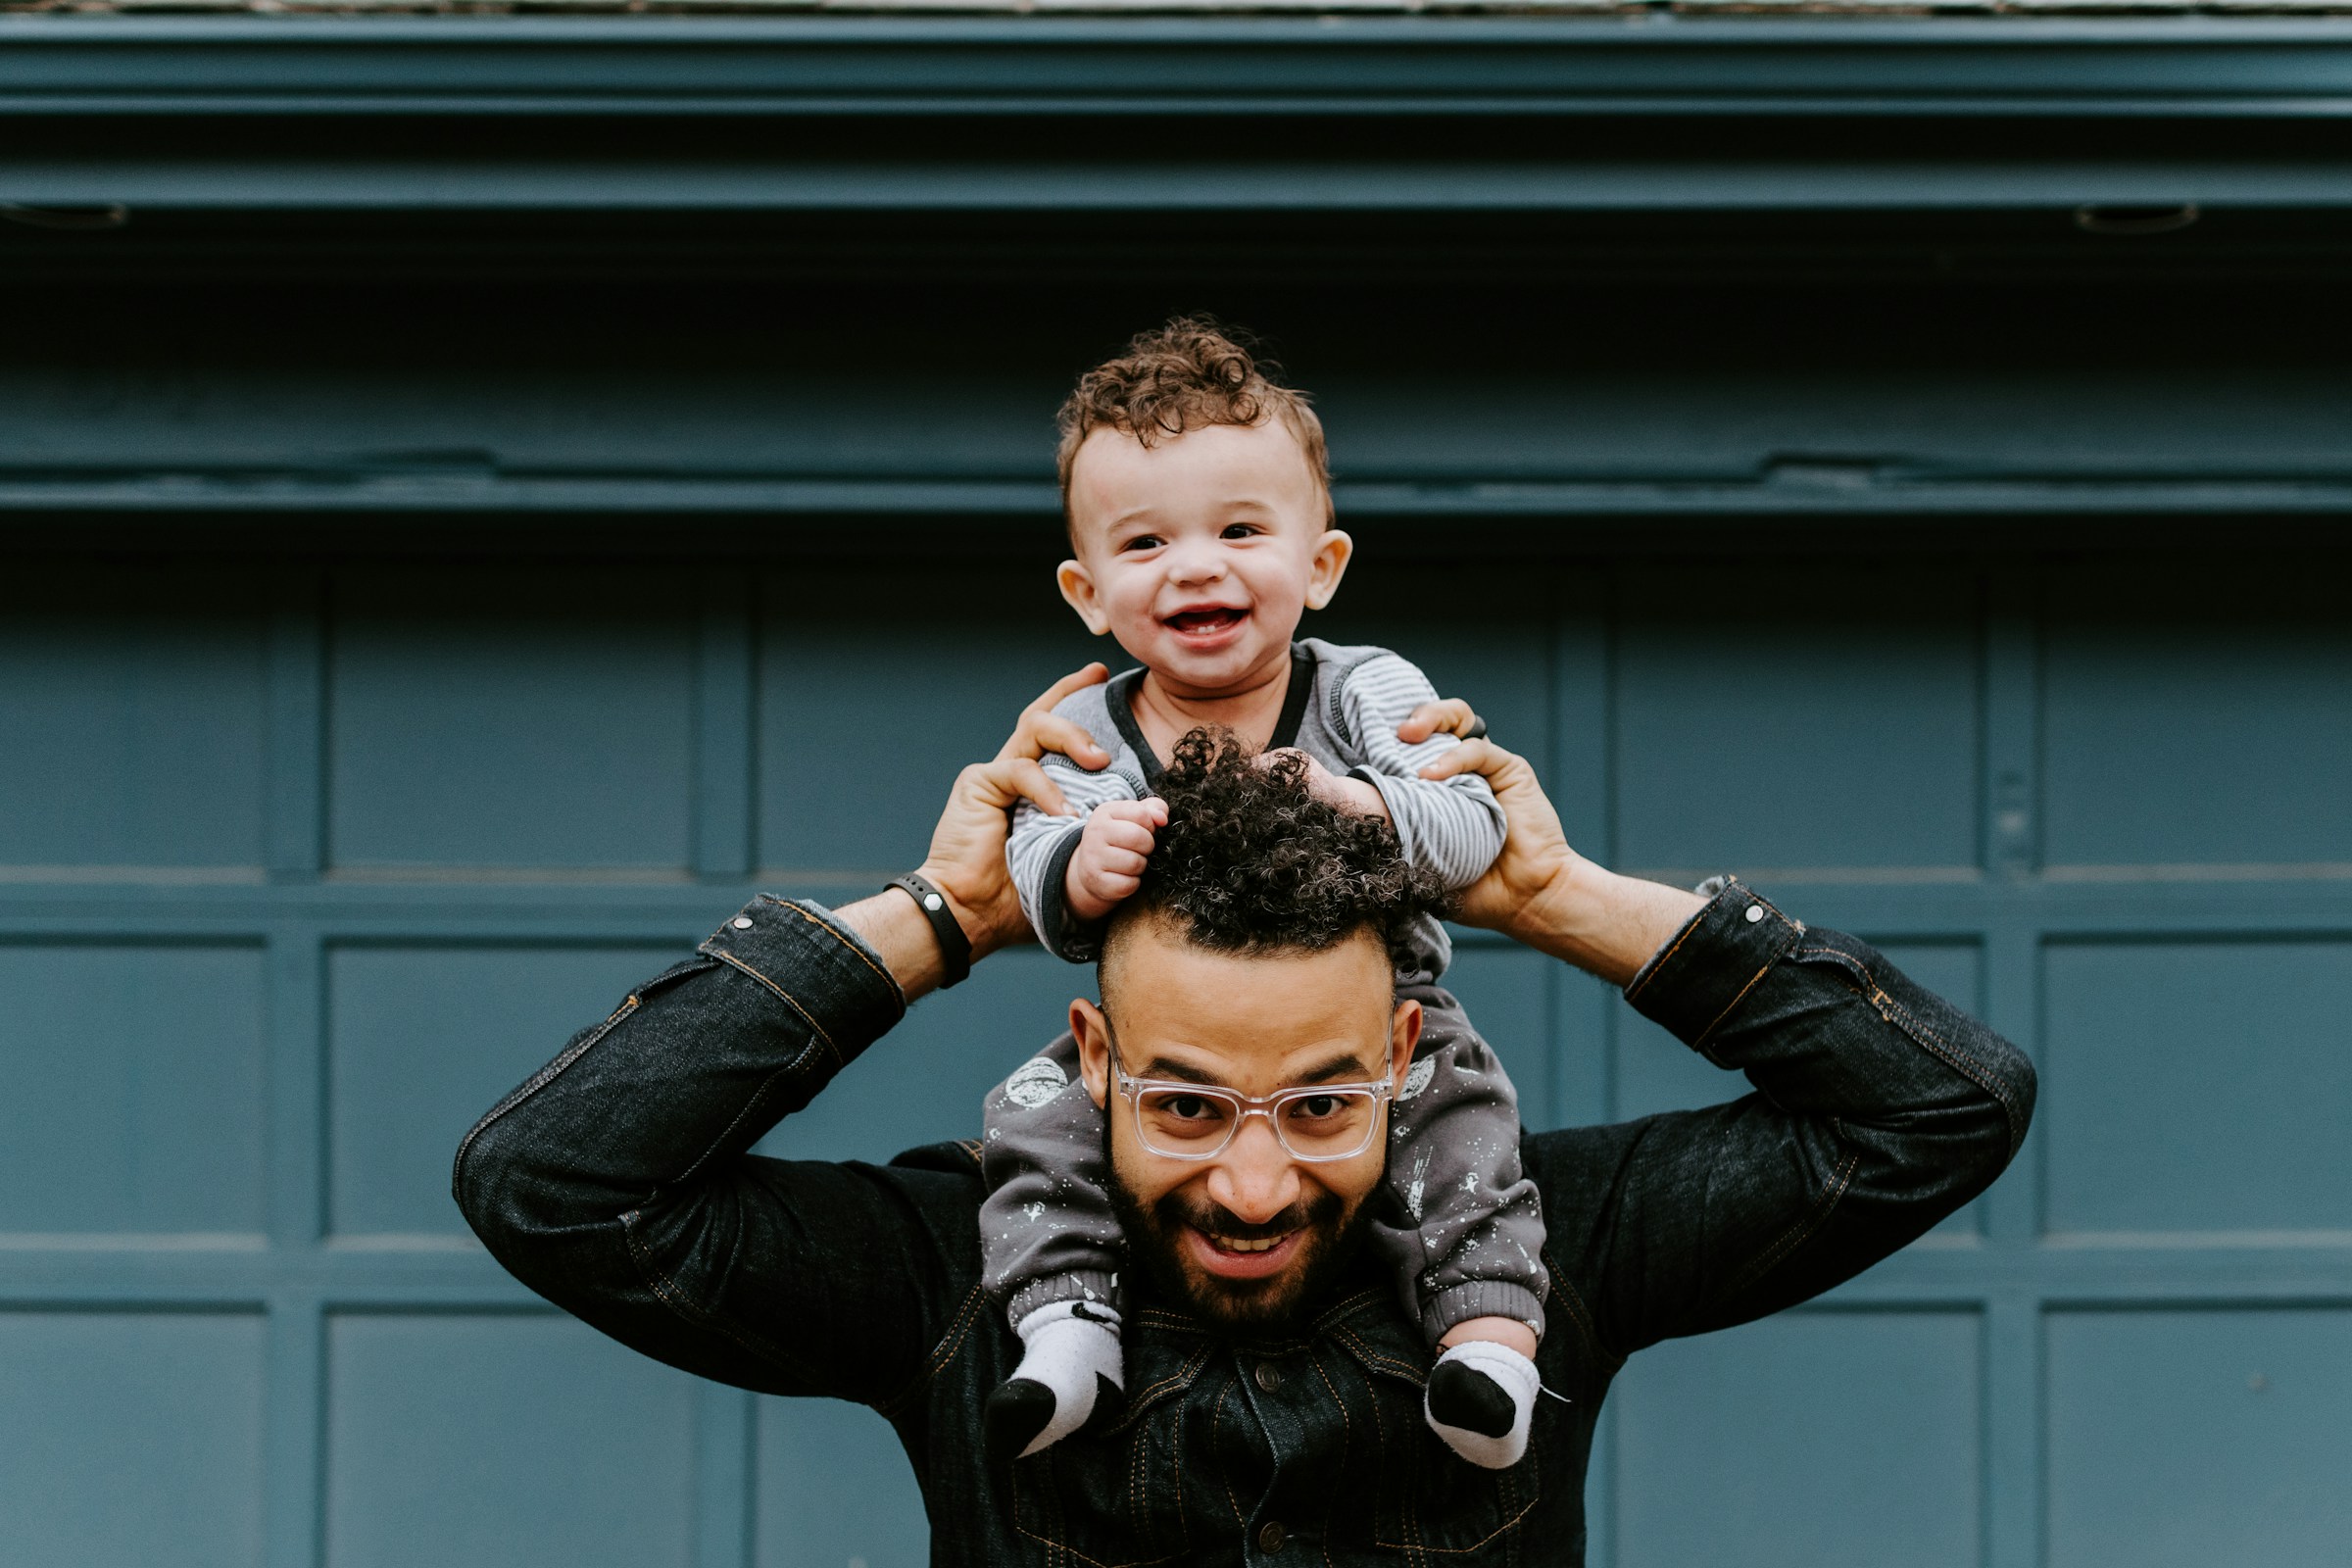 Man carrying a toddler on his shoulders | Source: Unsplash